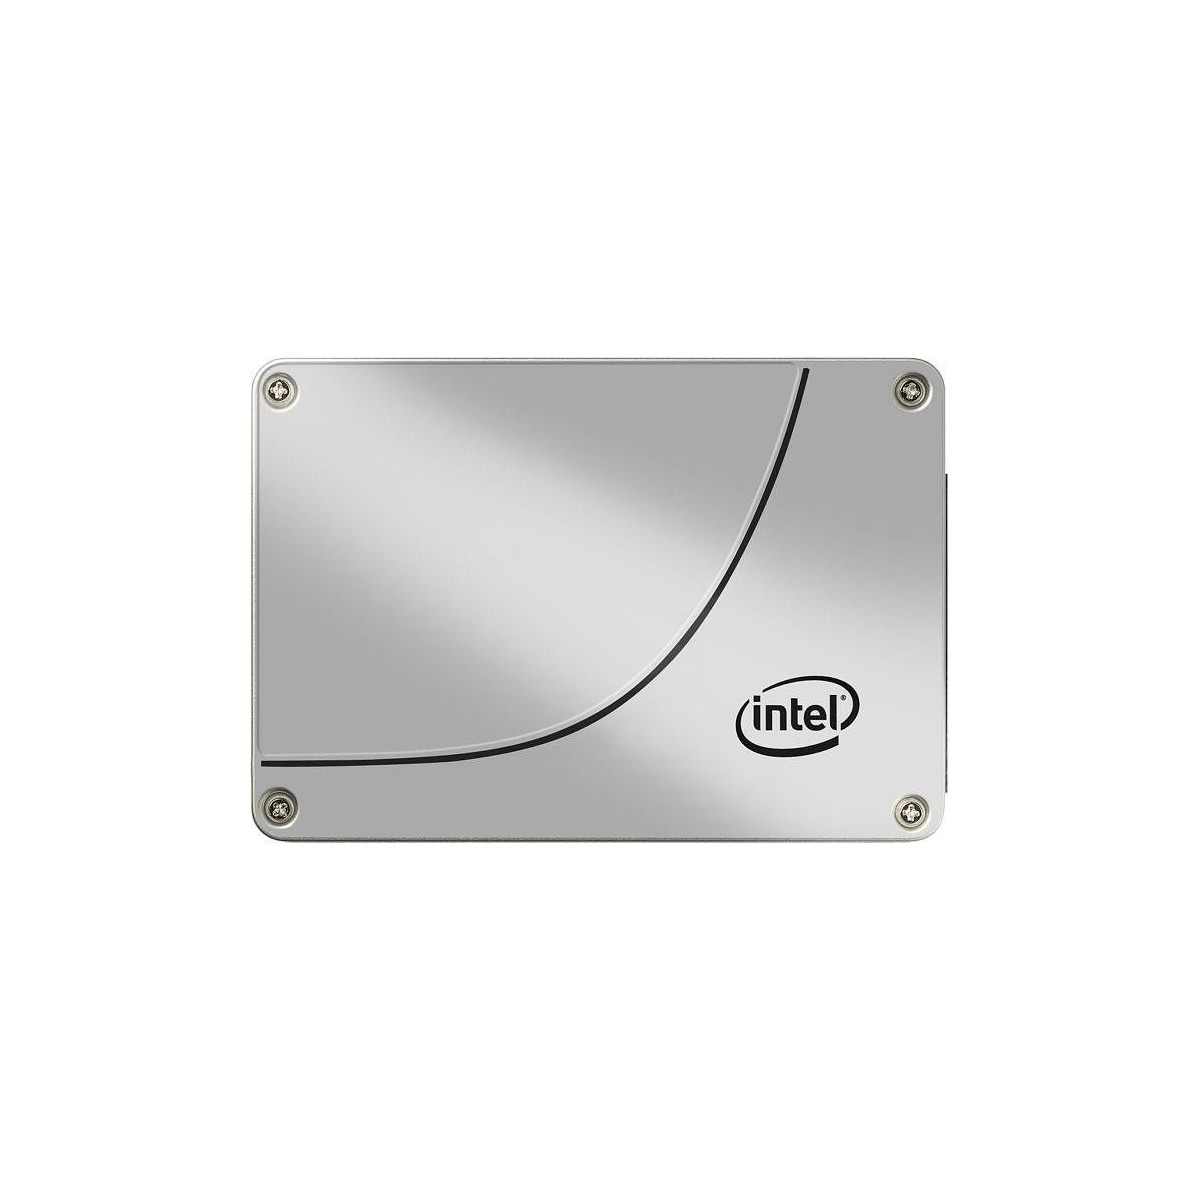 Intel Solid-State Drive DC S3710 Series 2.5 SATA 200 GB - Solid State Disk - Internal